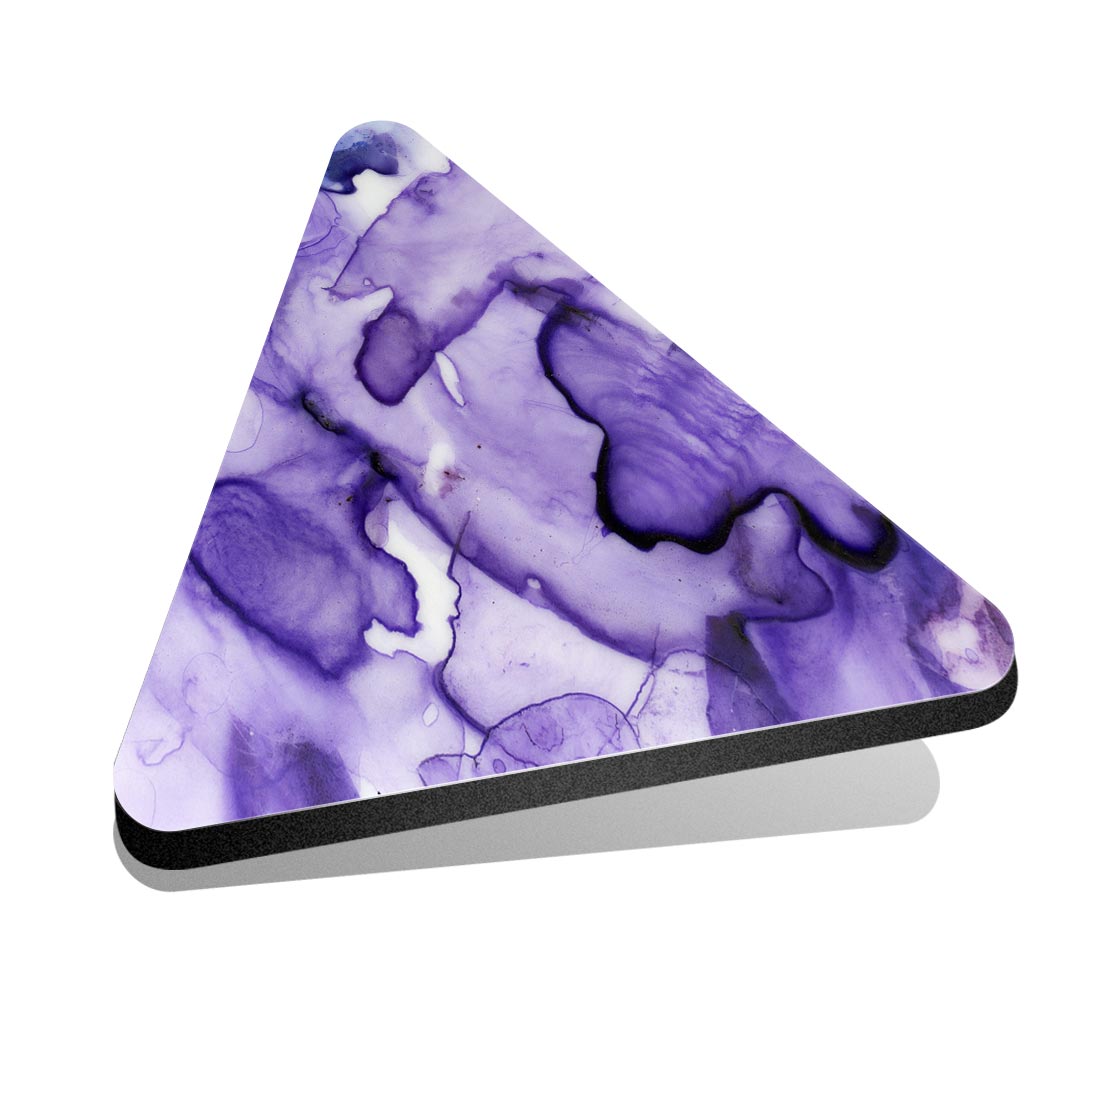 1x Triangle Fridge MDF Magnet Abstract Purple Violet Ink Art #50029 - Picture 1 of 1